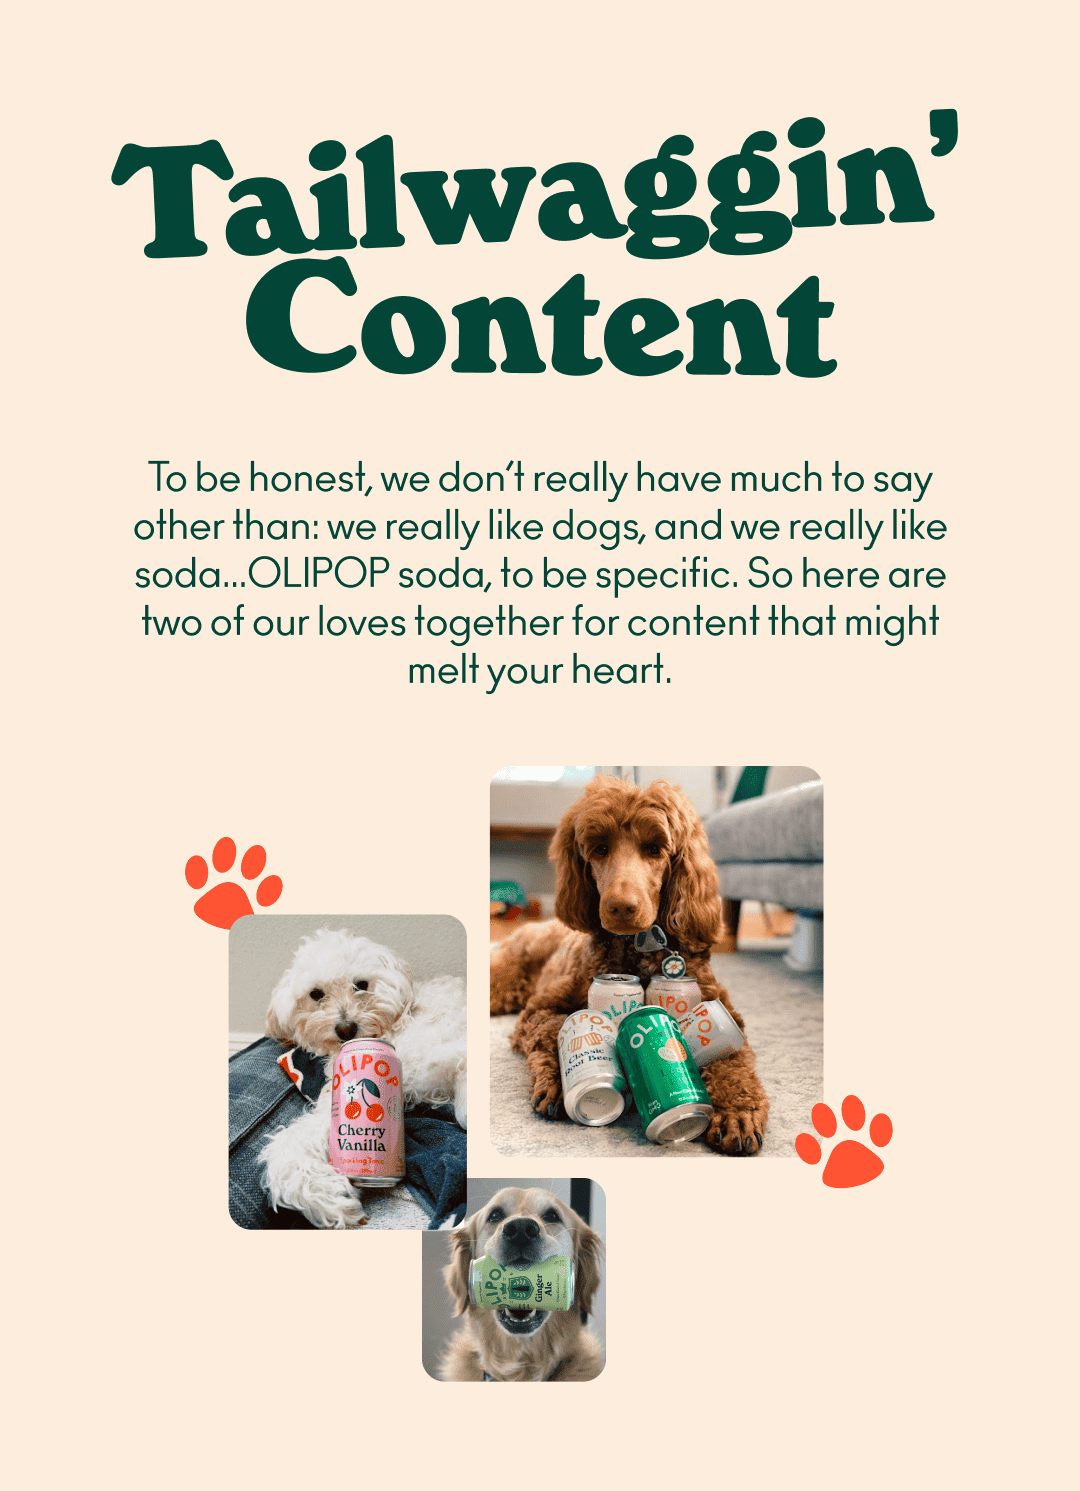 We really like dogs and we really like soda... OLIPOP soda to be specific. Here are two of our loves together for content that might melt your heart.